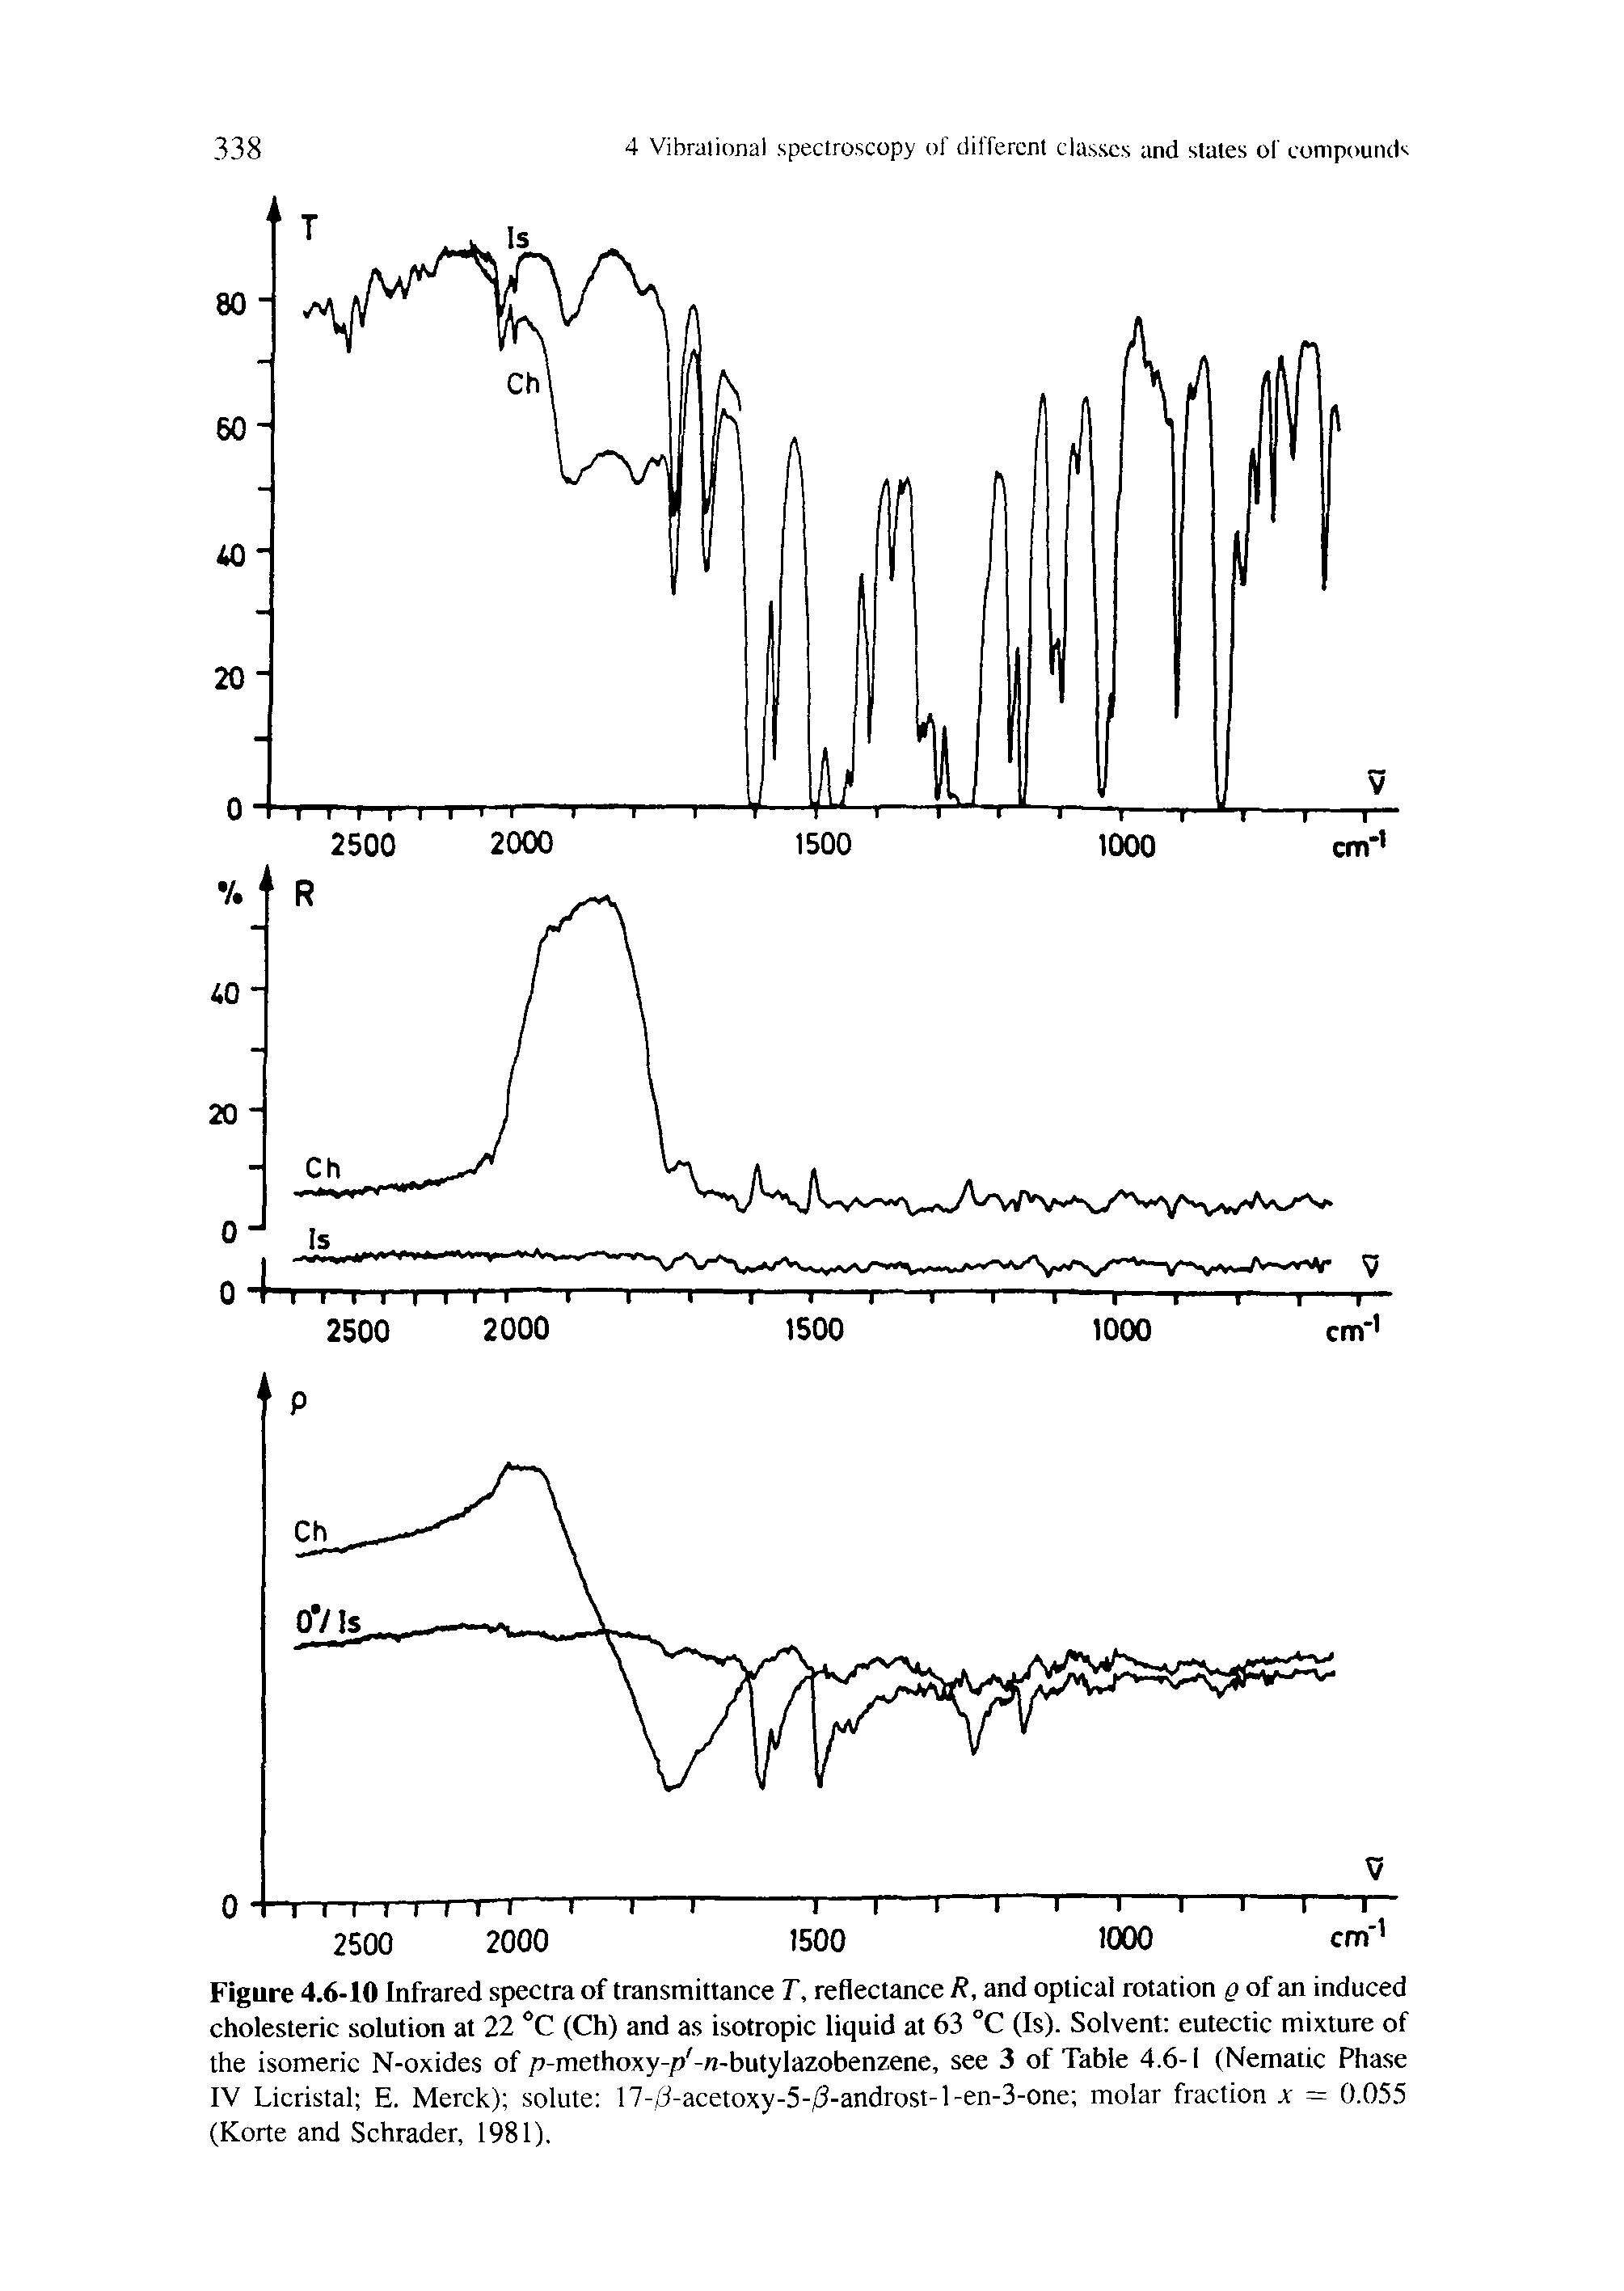 Figure 4.6-10 Infrared spectra of transmittance T, reflectance R, and optical rotation p of an induced cholesteric solution at 22 °C (Ch) and as isotropic liquid at 63 °C (Is). Solvent eutectic mixture of the isomeric N-oxides of p-methoxy-p -n-butylazobenzene, see 3 of Table 4.6-1 (Nematic Phase IV Licristal E. Merck) solute 17-3-acetoxy-5-/3-androst-l-en-3-one molar fraction x = 0.05.5 (Korte and Schrader, 1981).